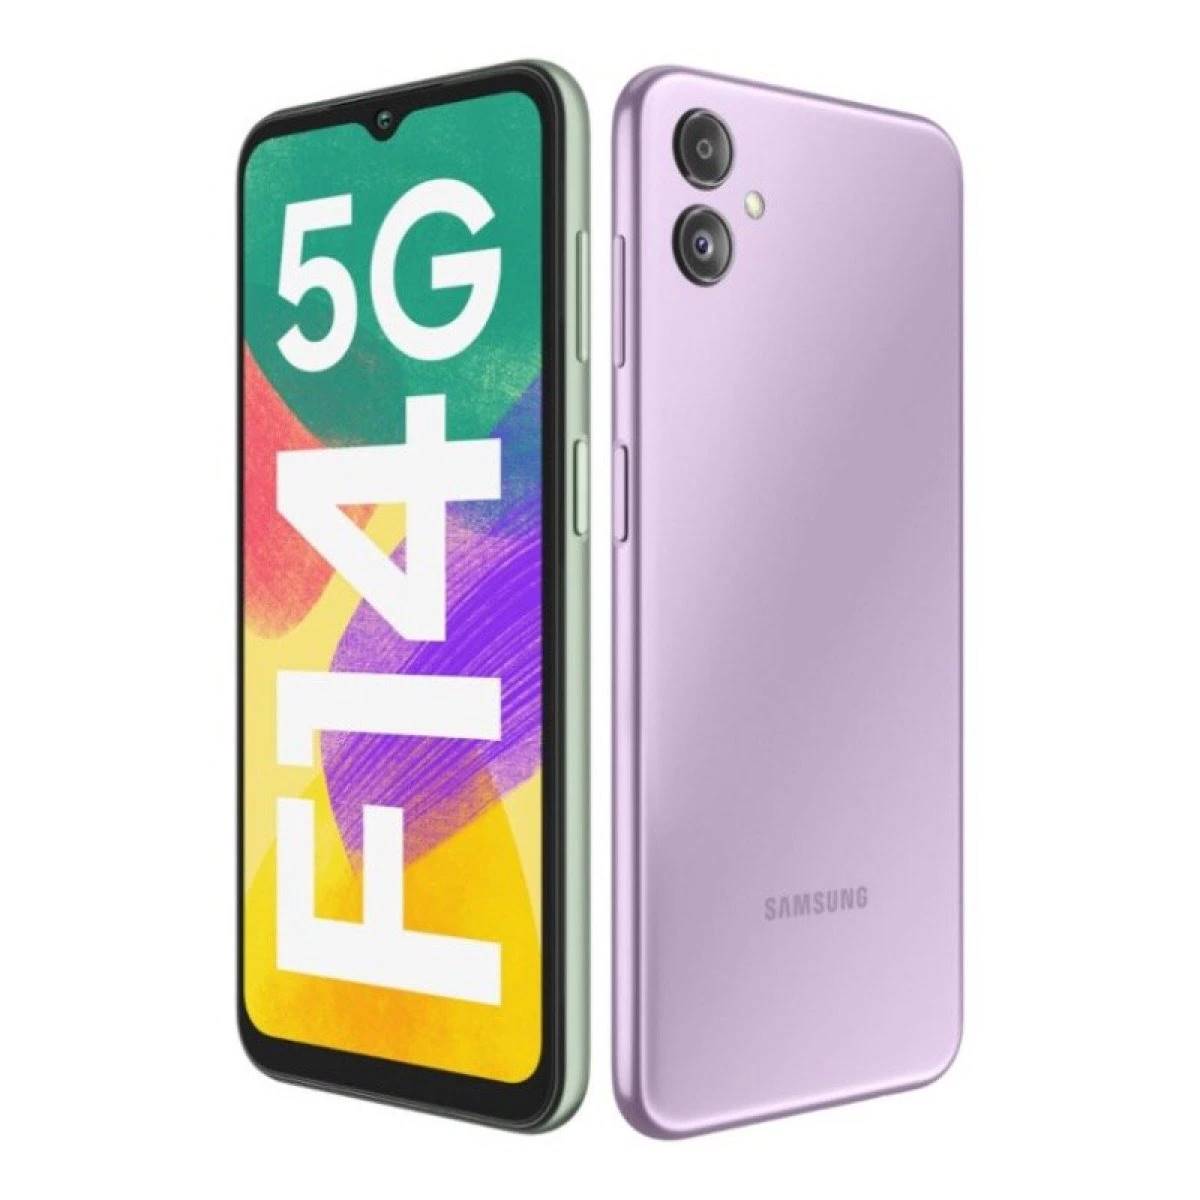 Samsung Galaxy F14 Released on 2023, March 30, 206g, 9.4mm thickness, Android 13, One UI Core 5.1, 128GB storage, microSDXC, 6.6"1080x2408 pixels, 50MP1080p, 4/6GB RAMExynos 1330, 6000mAhLi-Po